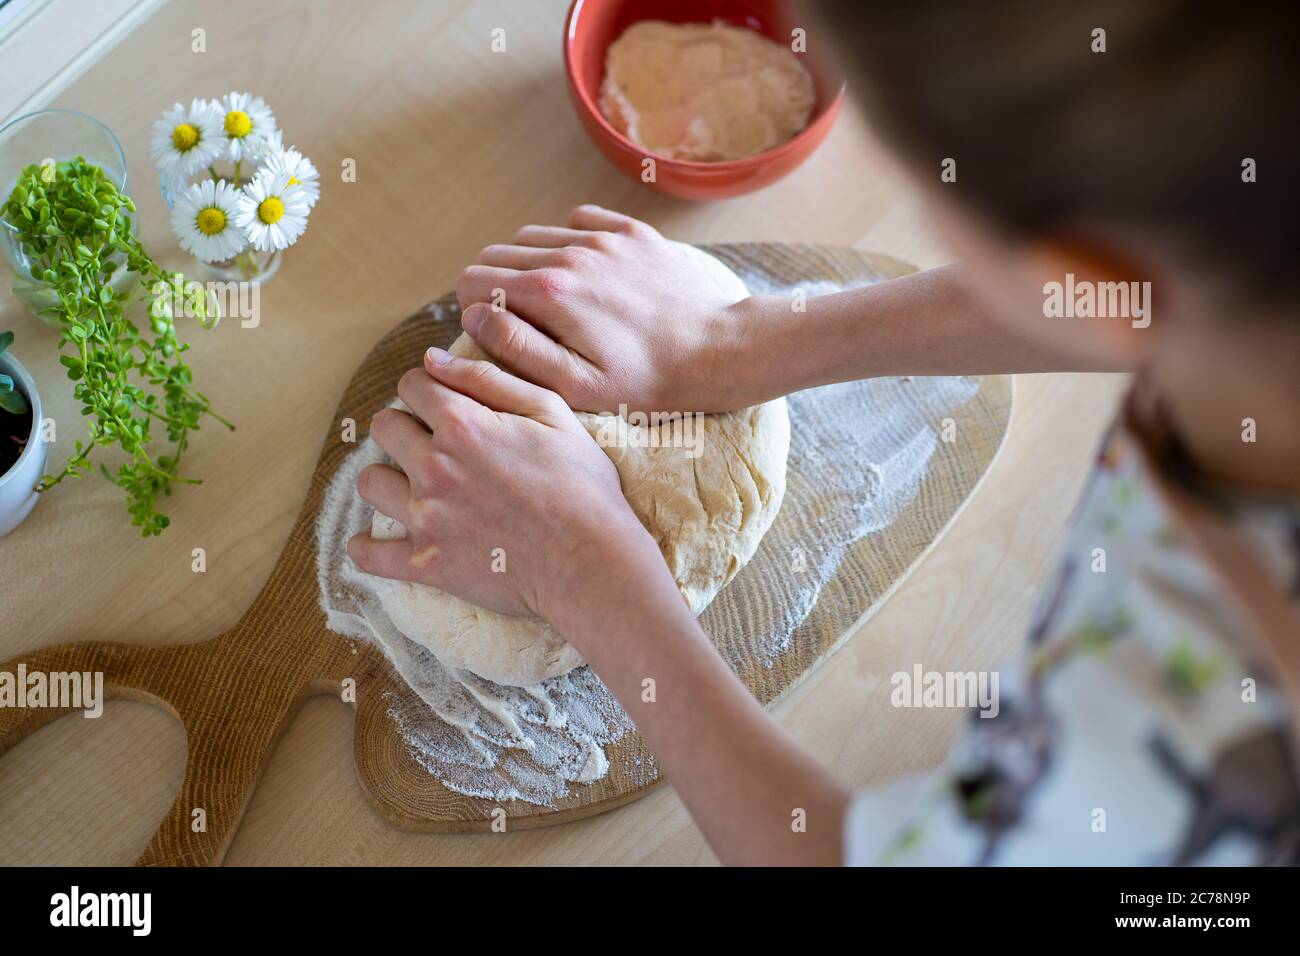 Kid is making, easy to prepare and healthy, home made irish soda bread. Home bakery. Stock Photo